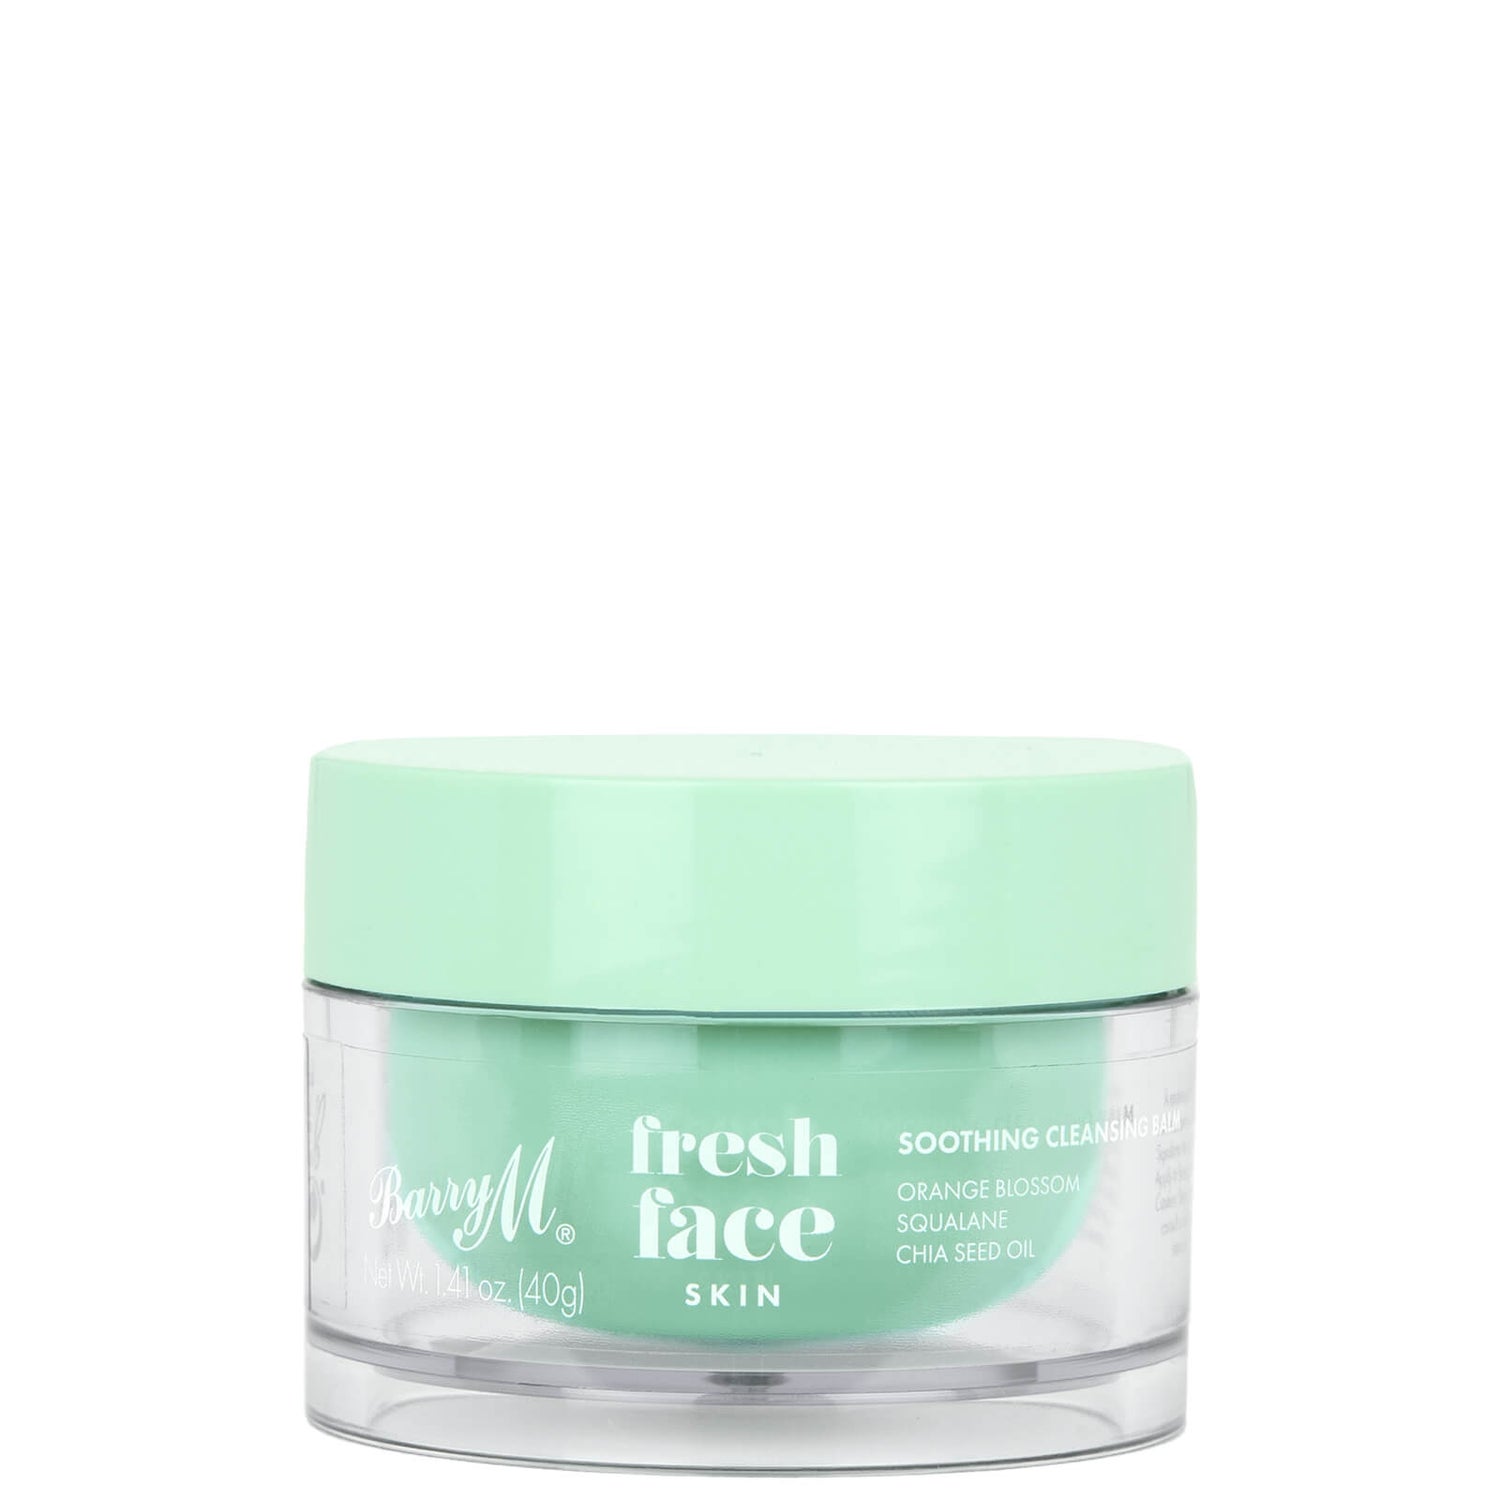 Barry M Cosmetics Fresh Face Skin Soothing Cleansing Balm 40g